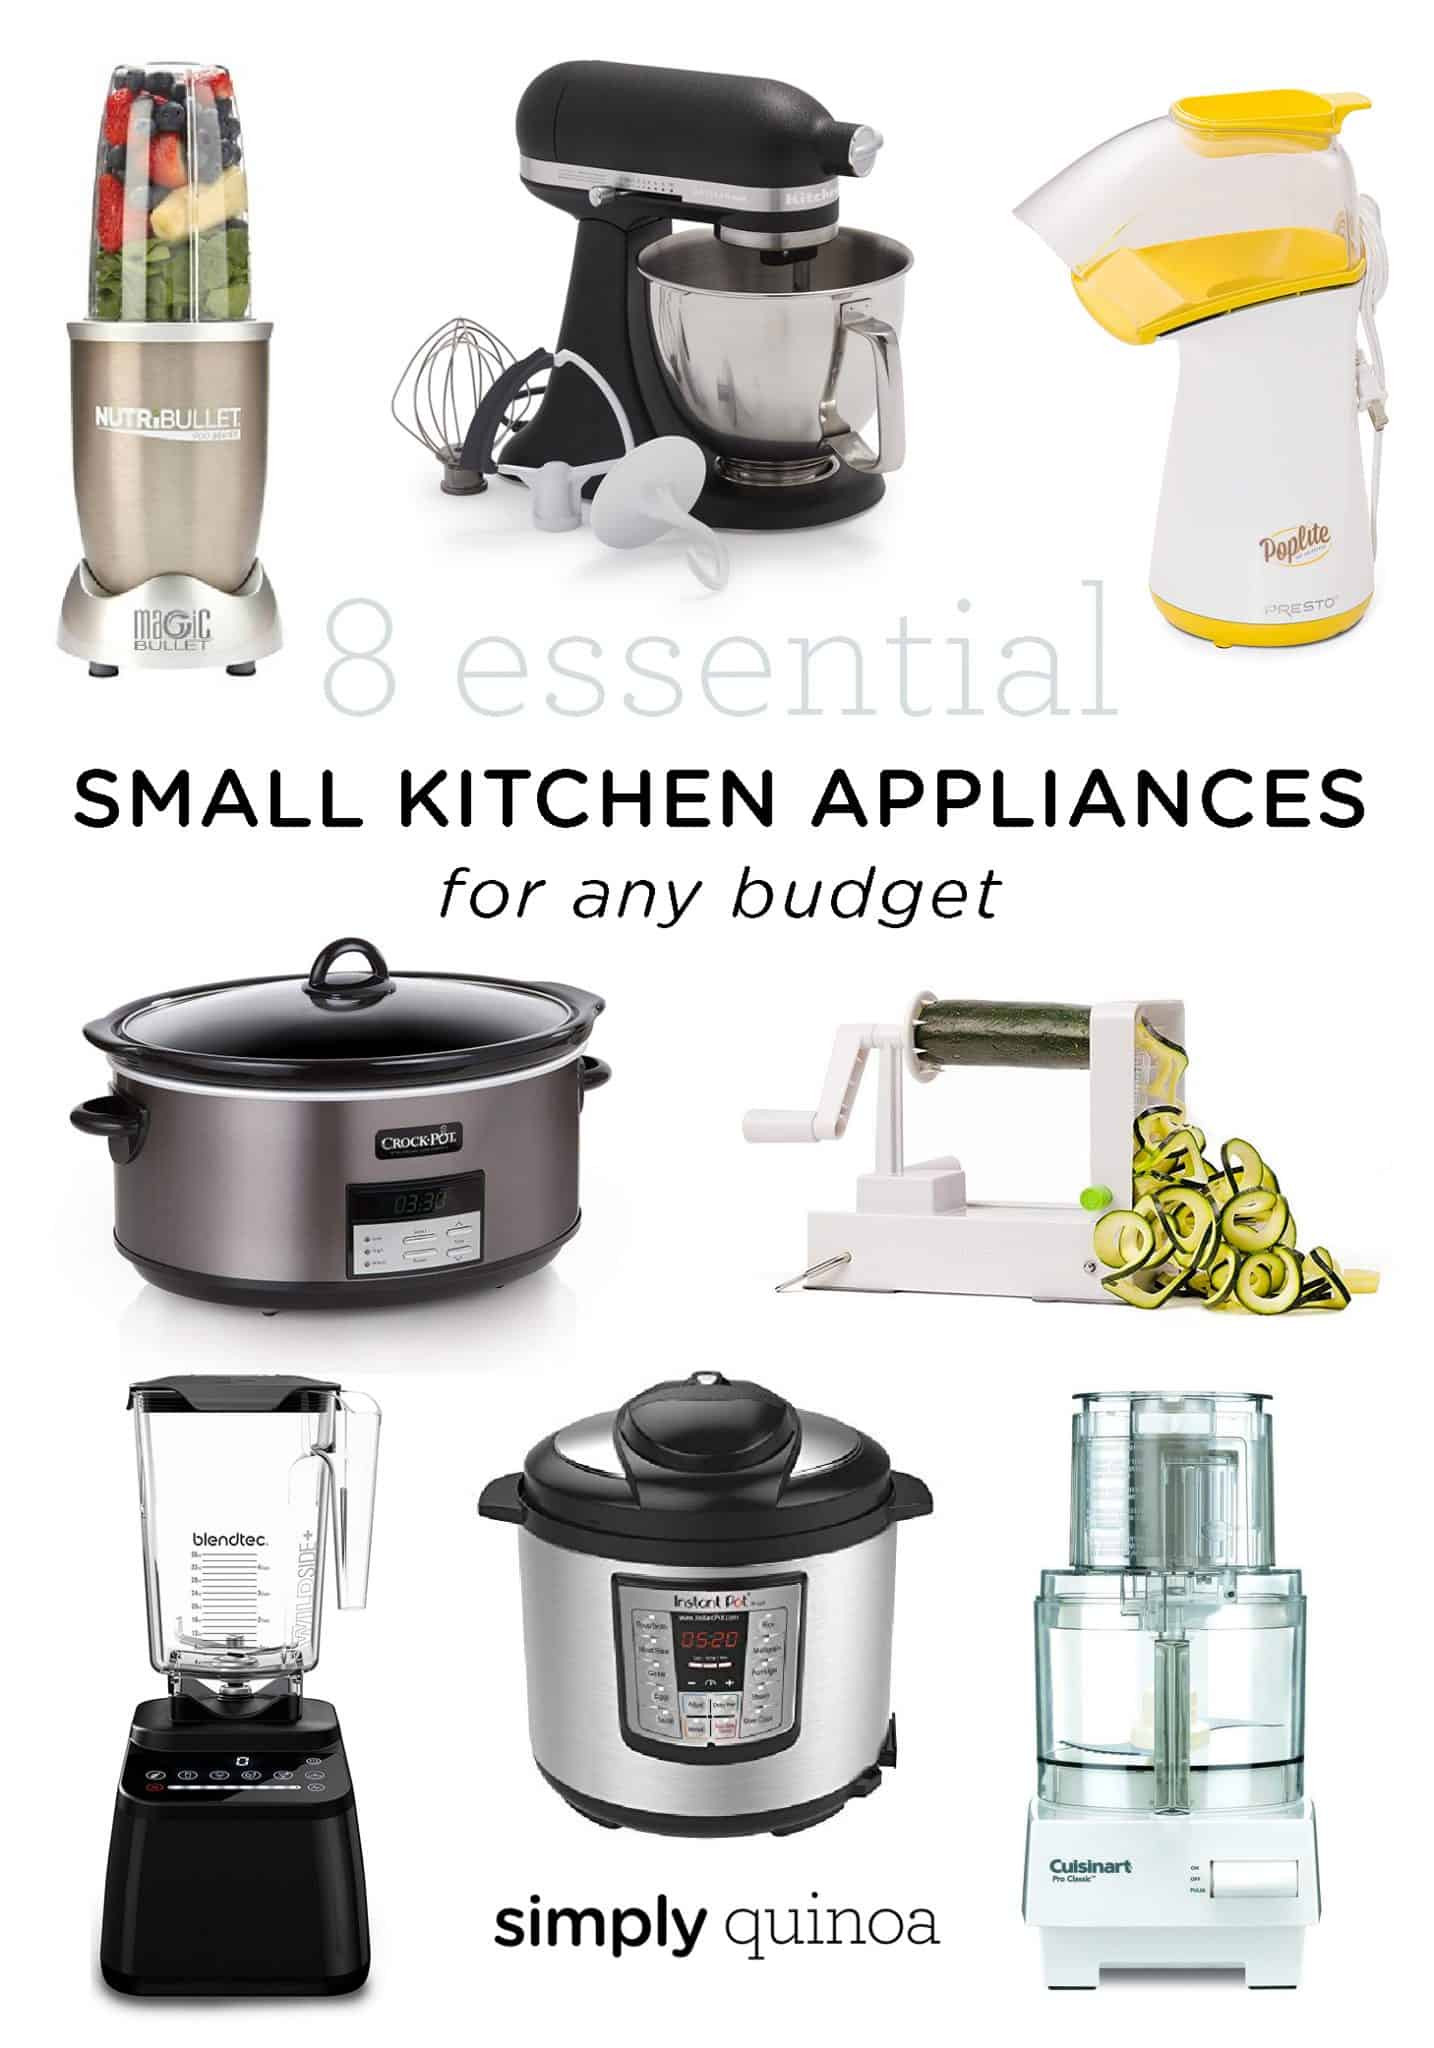 Small Kitchen Stoves
 8 Essential Small Kitchen Appliances for Any Bud